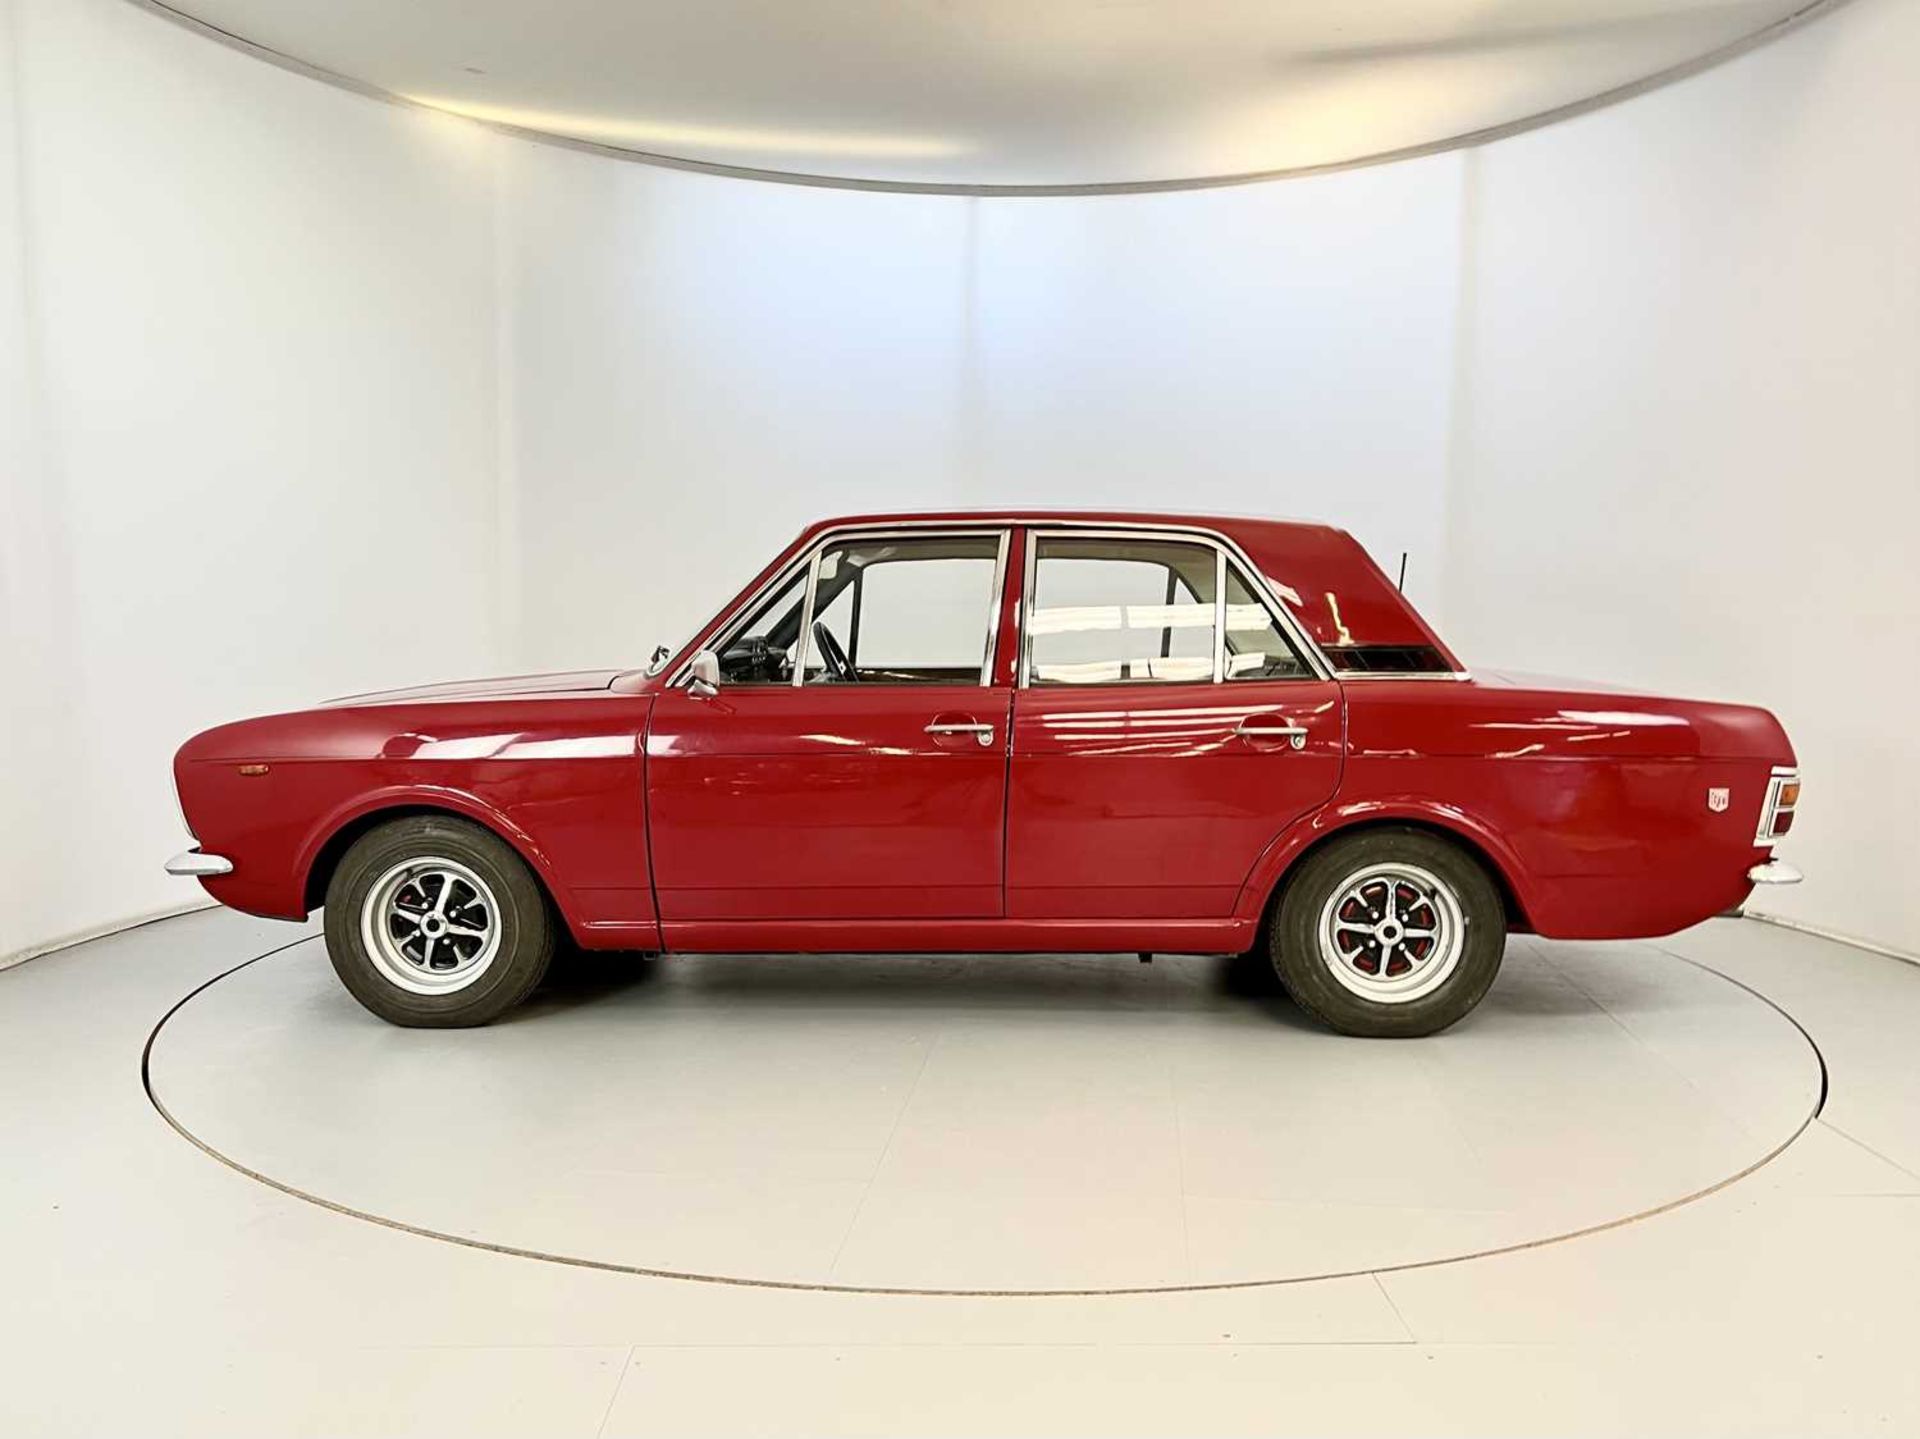 1967 Ford Cortina 1600GT - Image 5 of 37